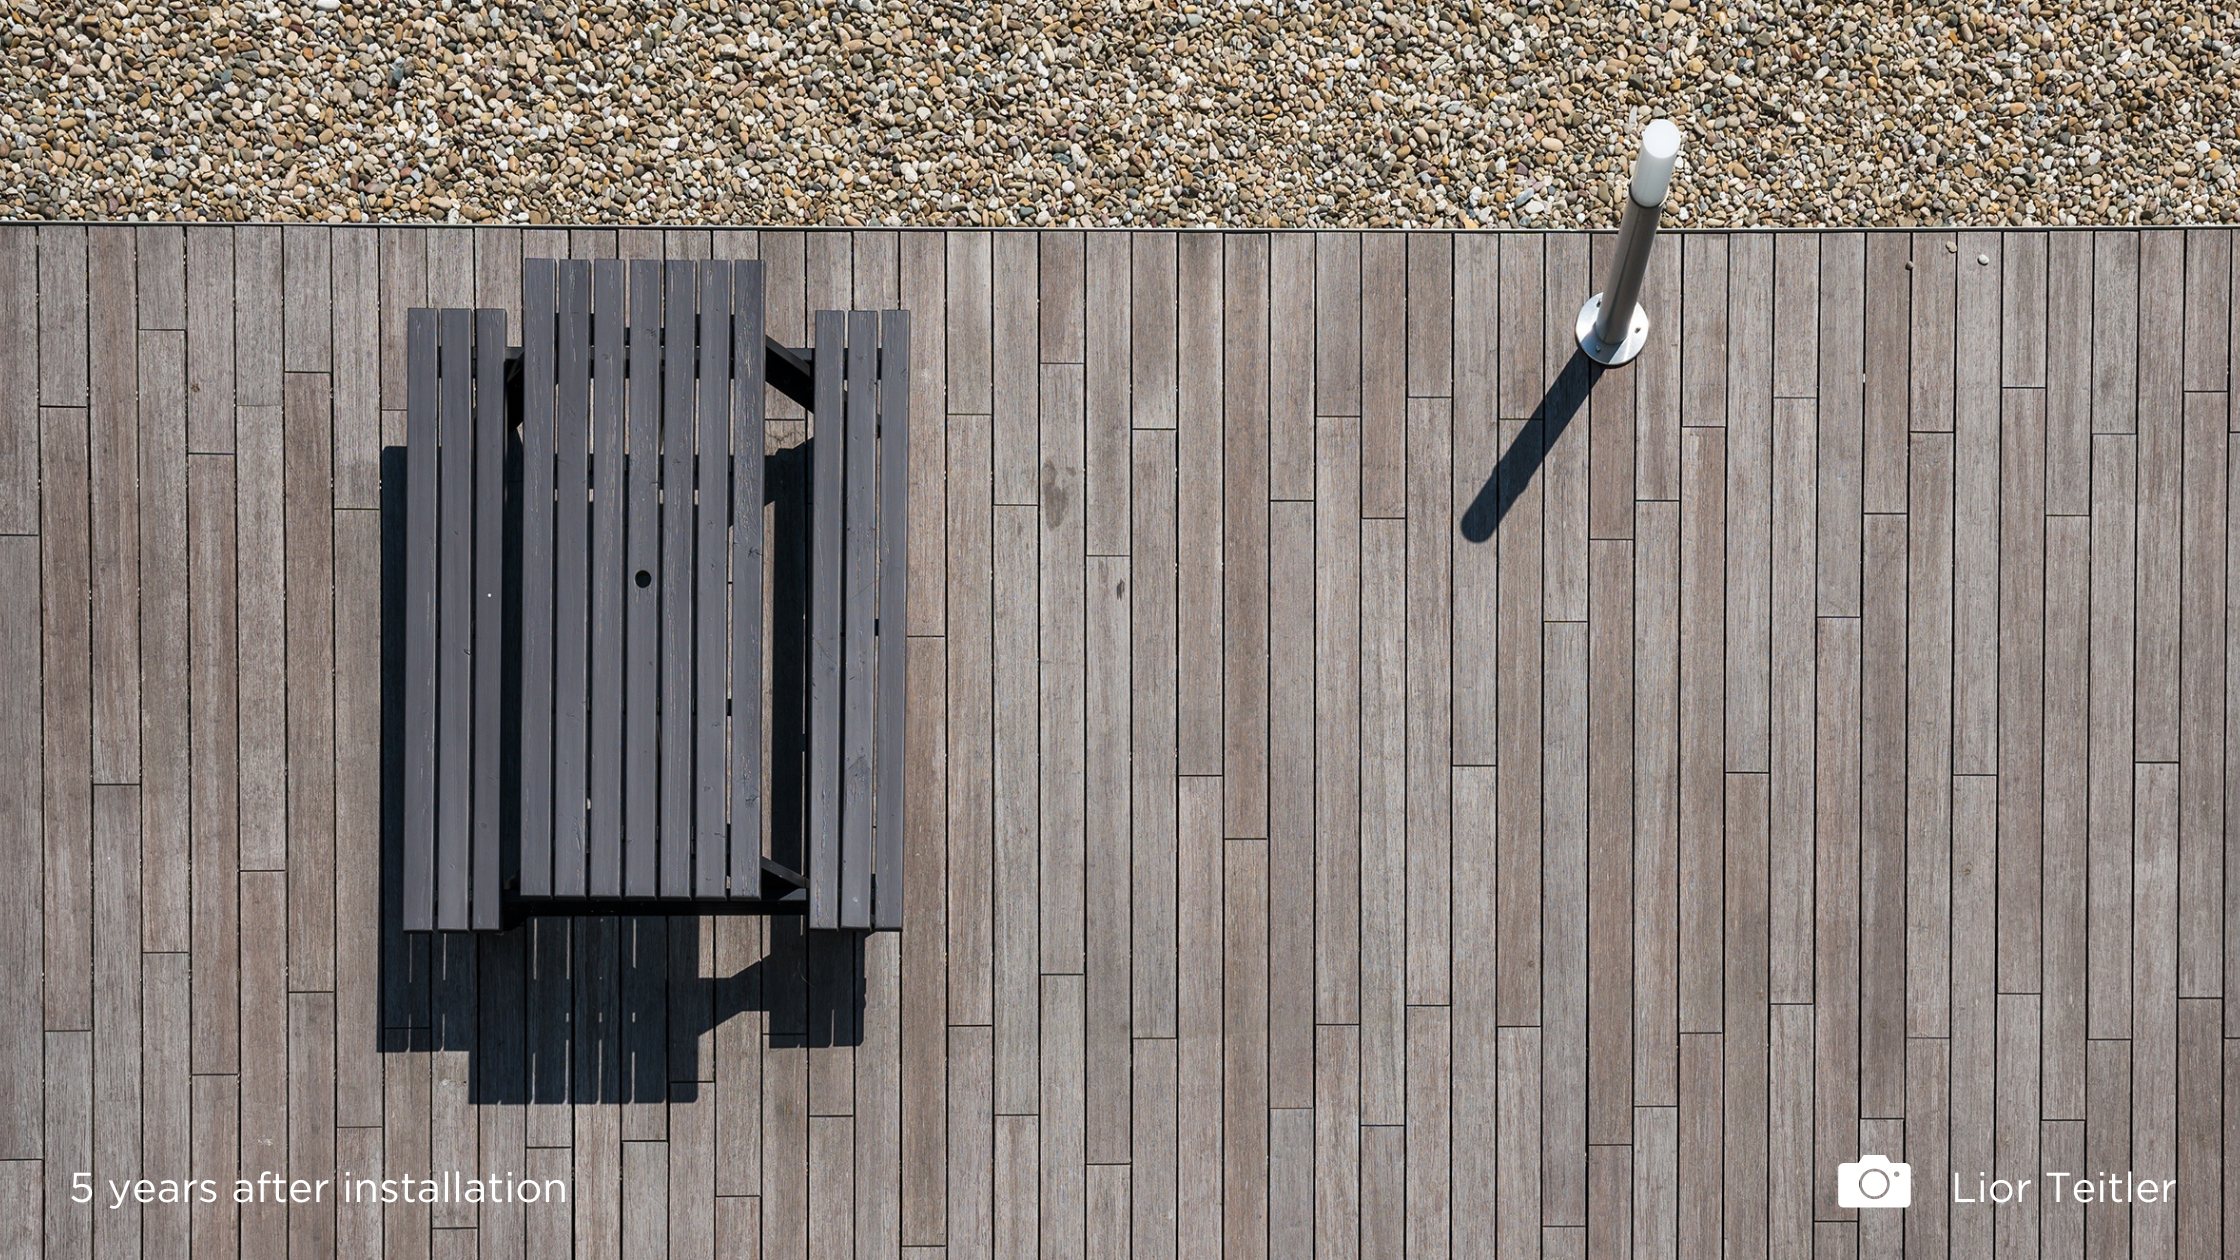 How environmentally friendly are bamboo decking boards?